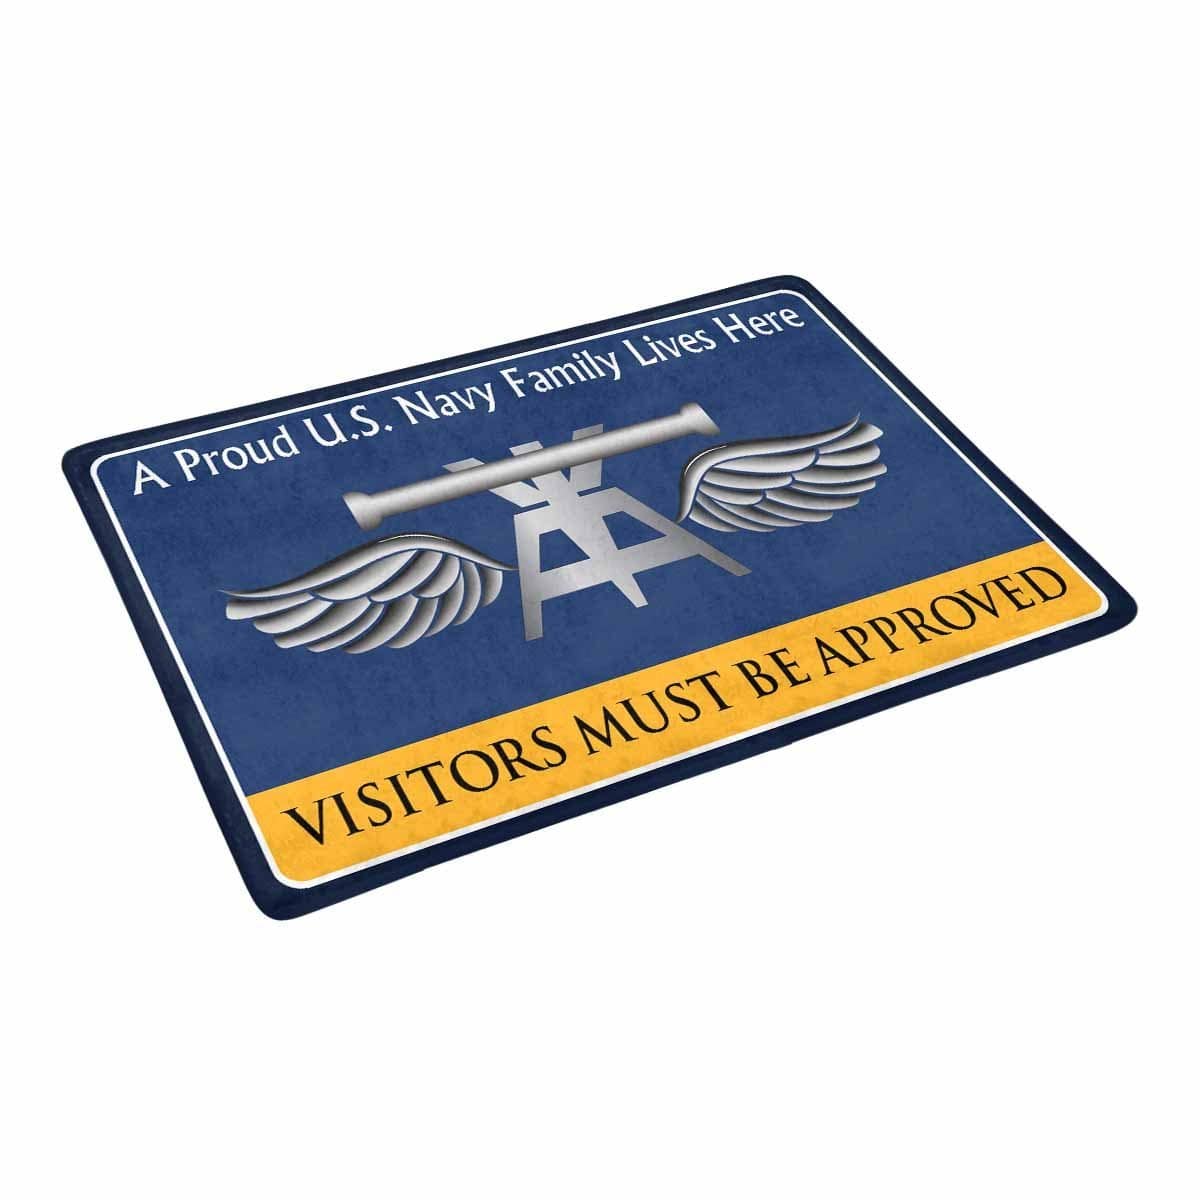 Navy Aviation Fire Control Tech Navy AQ Family Doormat - Visitors must be approved (23,6 inches x 15,7 inches)-Doormat-Navy-Rate-Veterans Nation